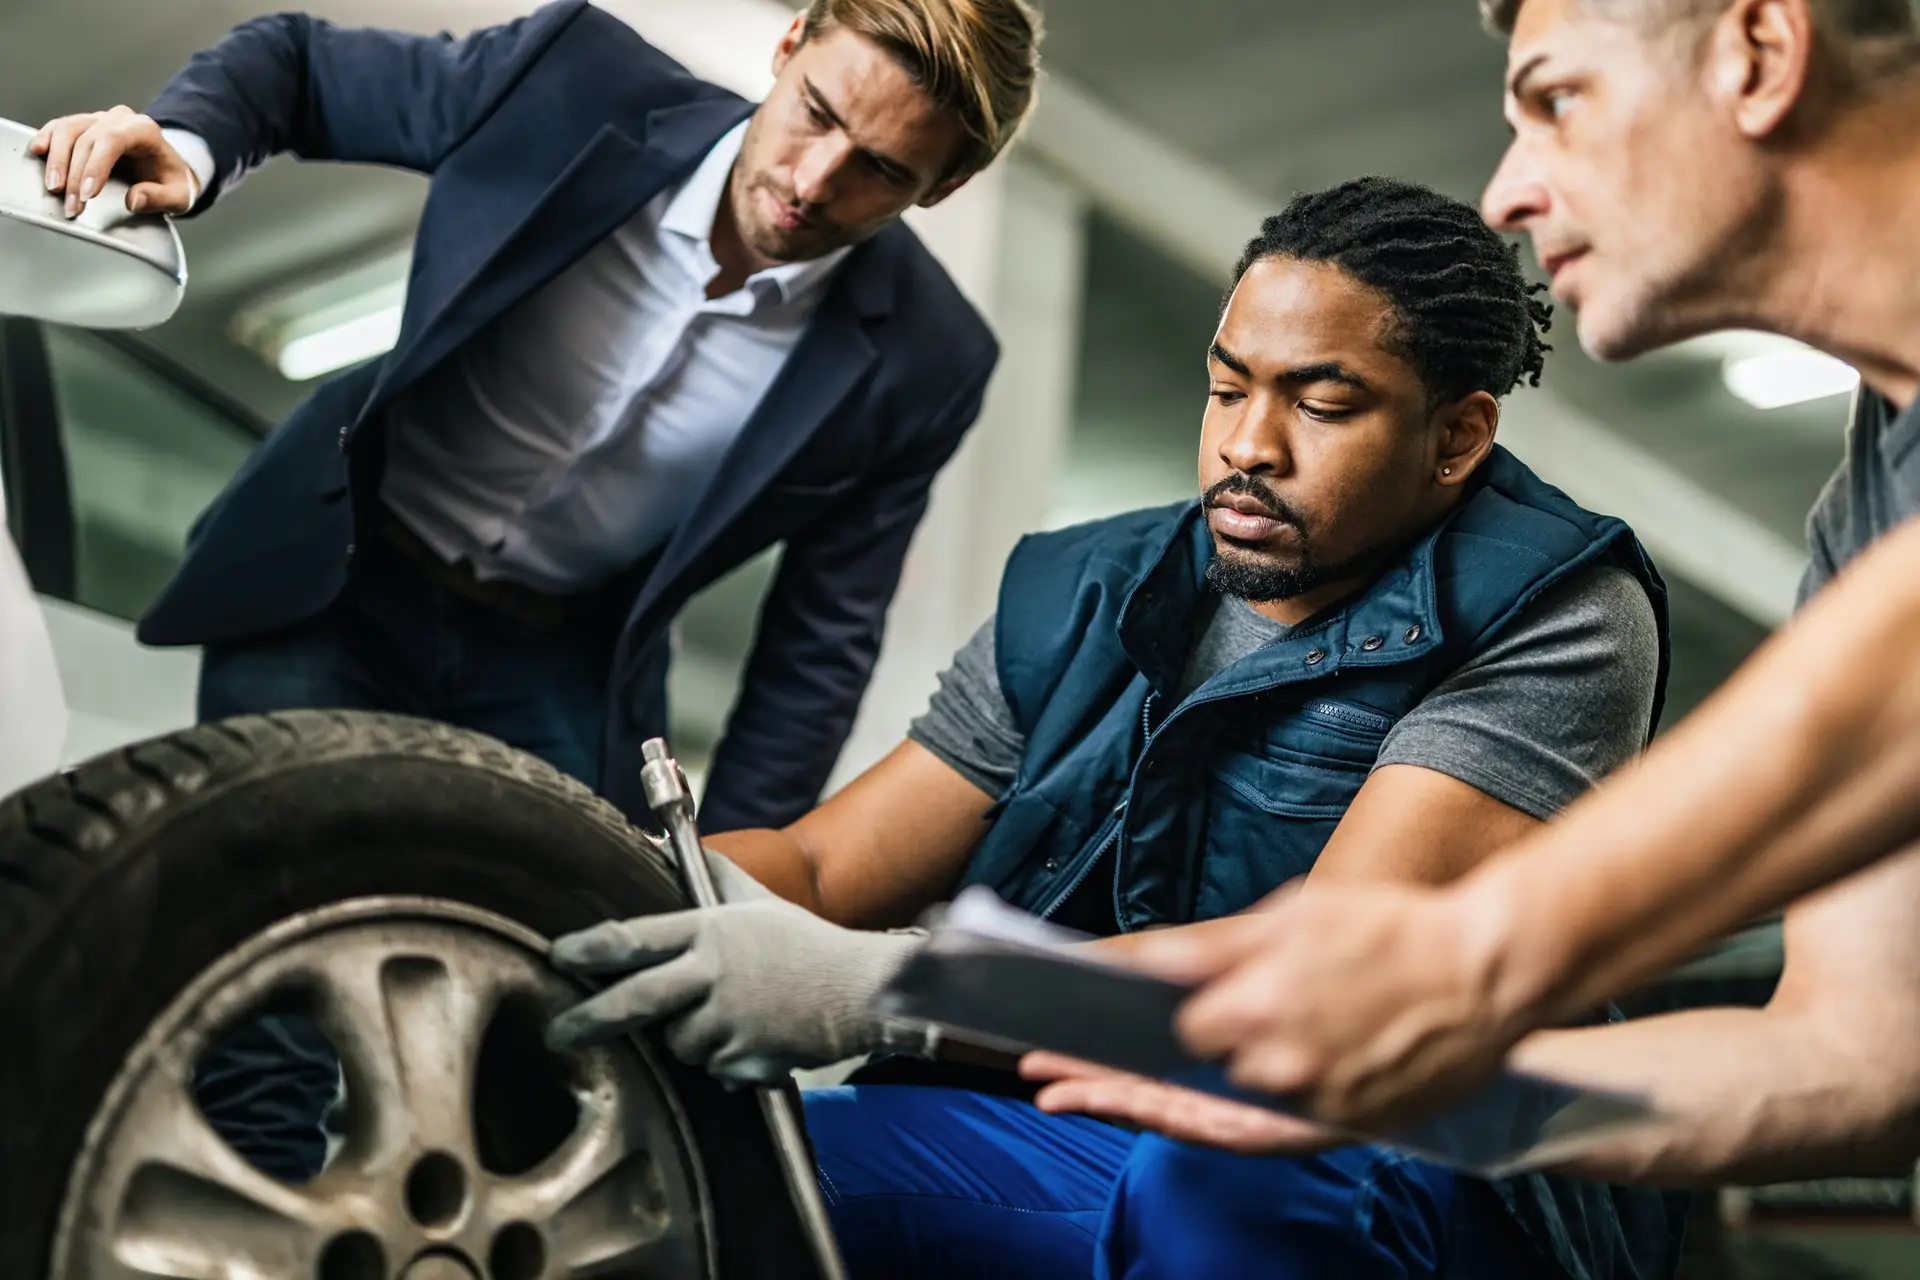 How To Find An Emergency Tire Service Auto mechanics repairing tire of customer's car at repair workshop.